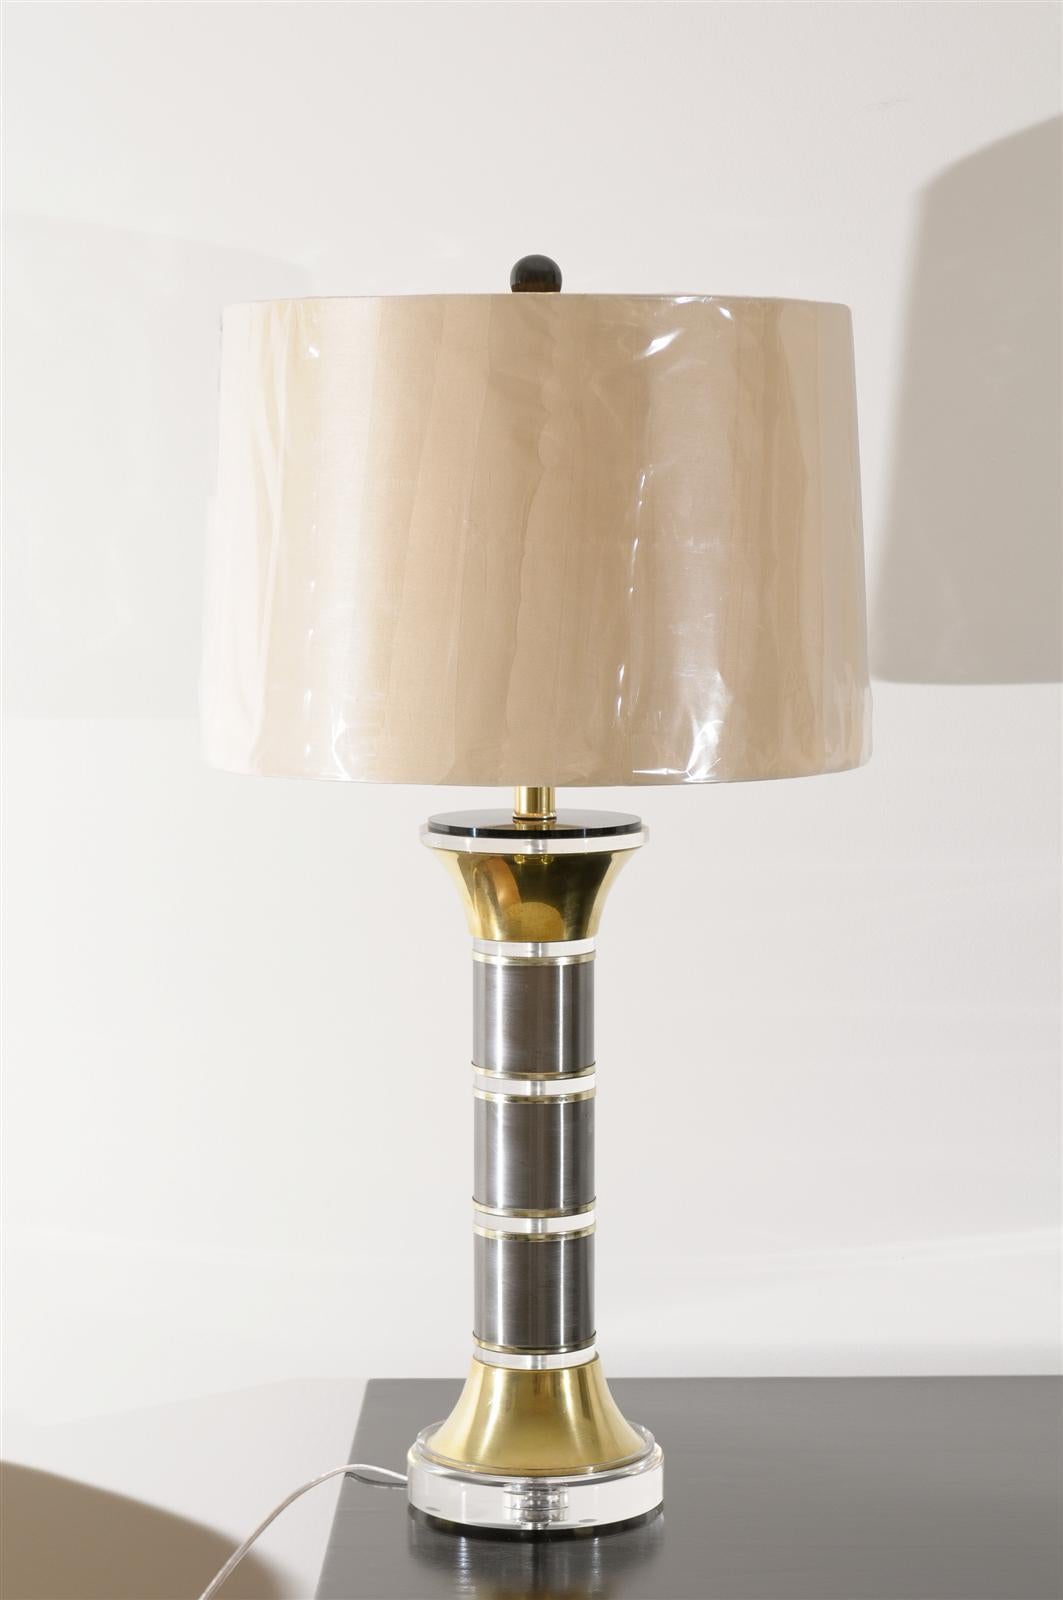 A sophisticated pair of vintage column lamps, circa 1970. Alternating sections of Lucite and stainless steel with solid brass accents. Dramatic pieces with wonderful scale. Fabulous jewelry! Excellent restored condition. The lamps have been re-wired